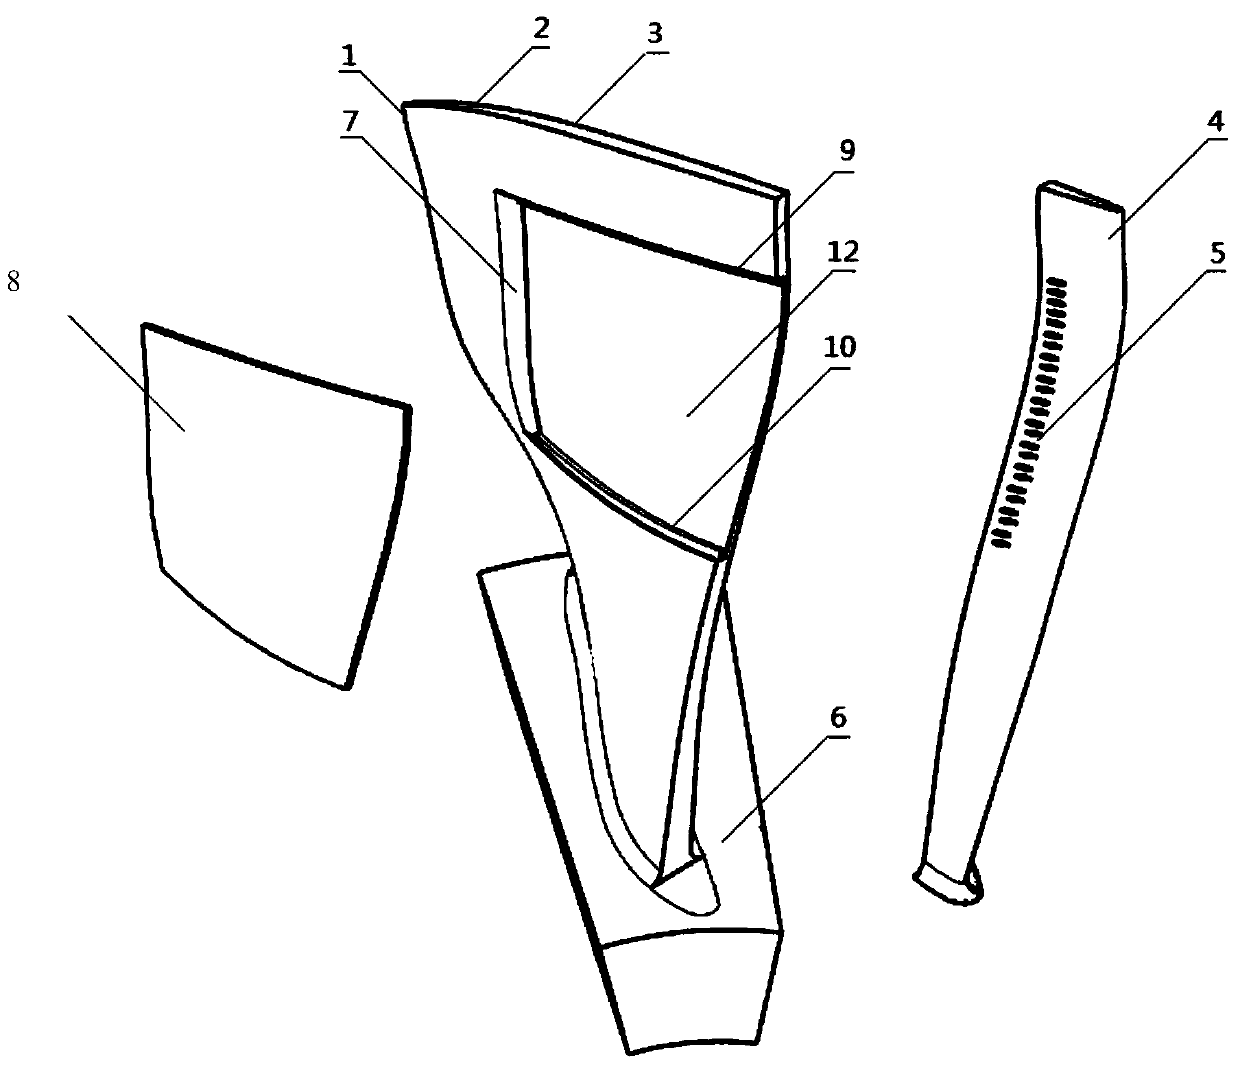 Air-film damped fan blades with orifices covered by shock-absorbing thin plates